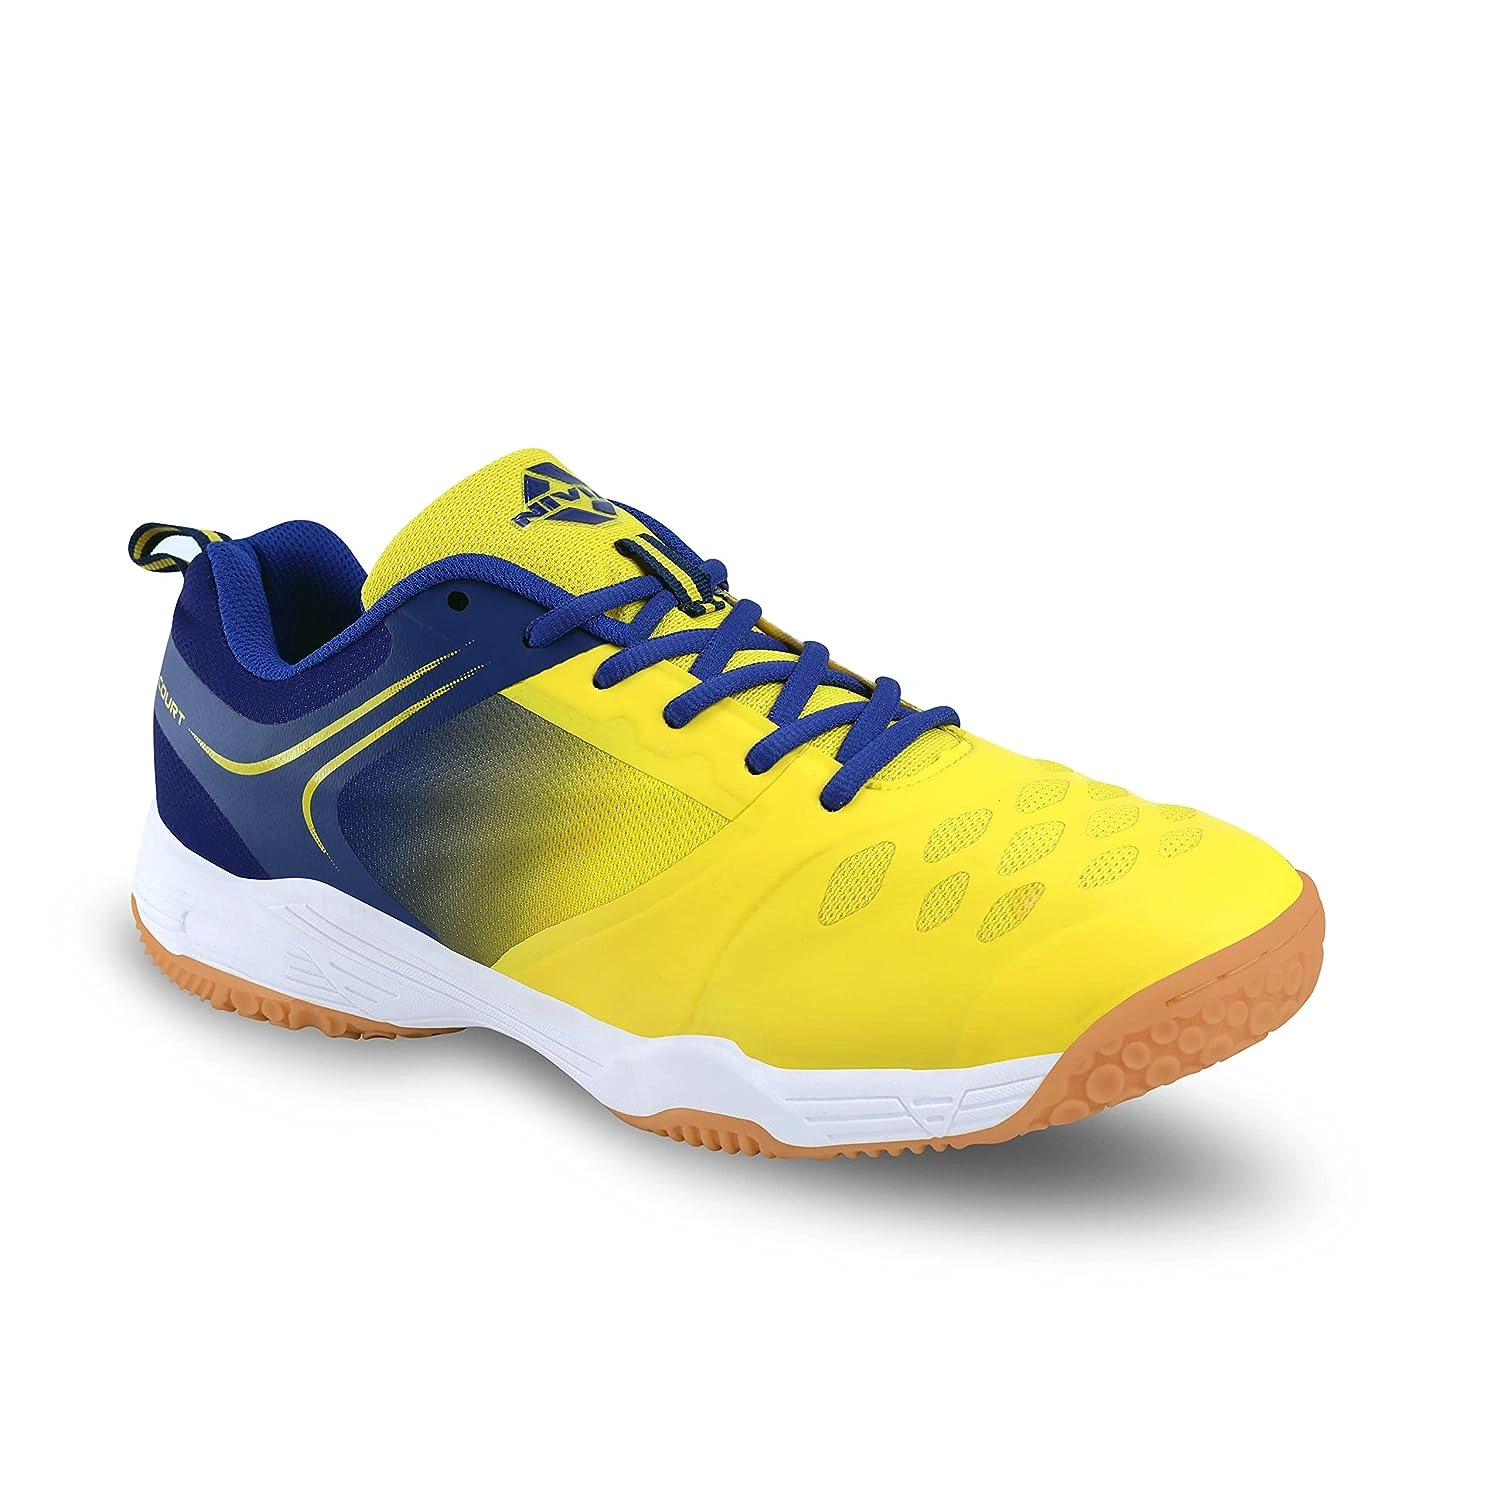 Nivia Hy-court 2.0 Badminton Shoes For Mens-YELL/ BLUE-7-1